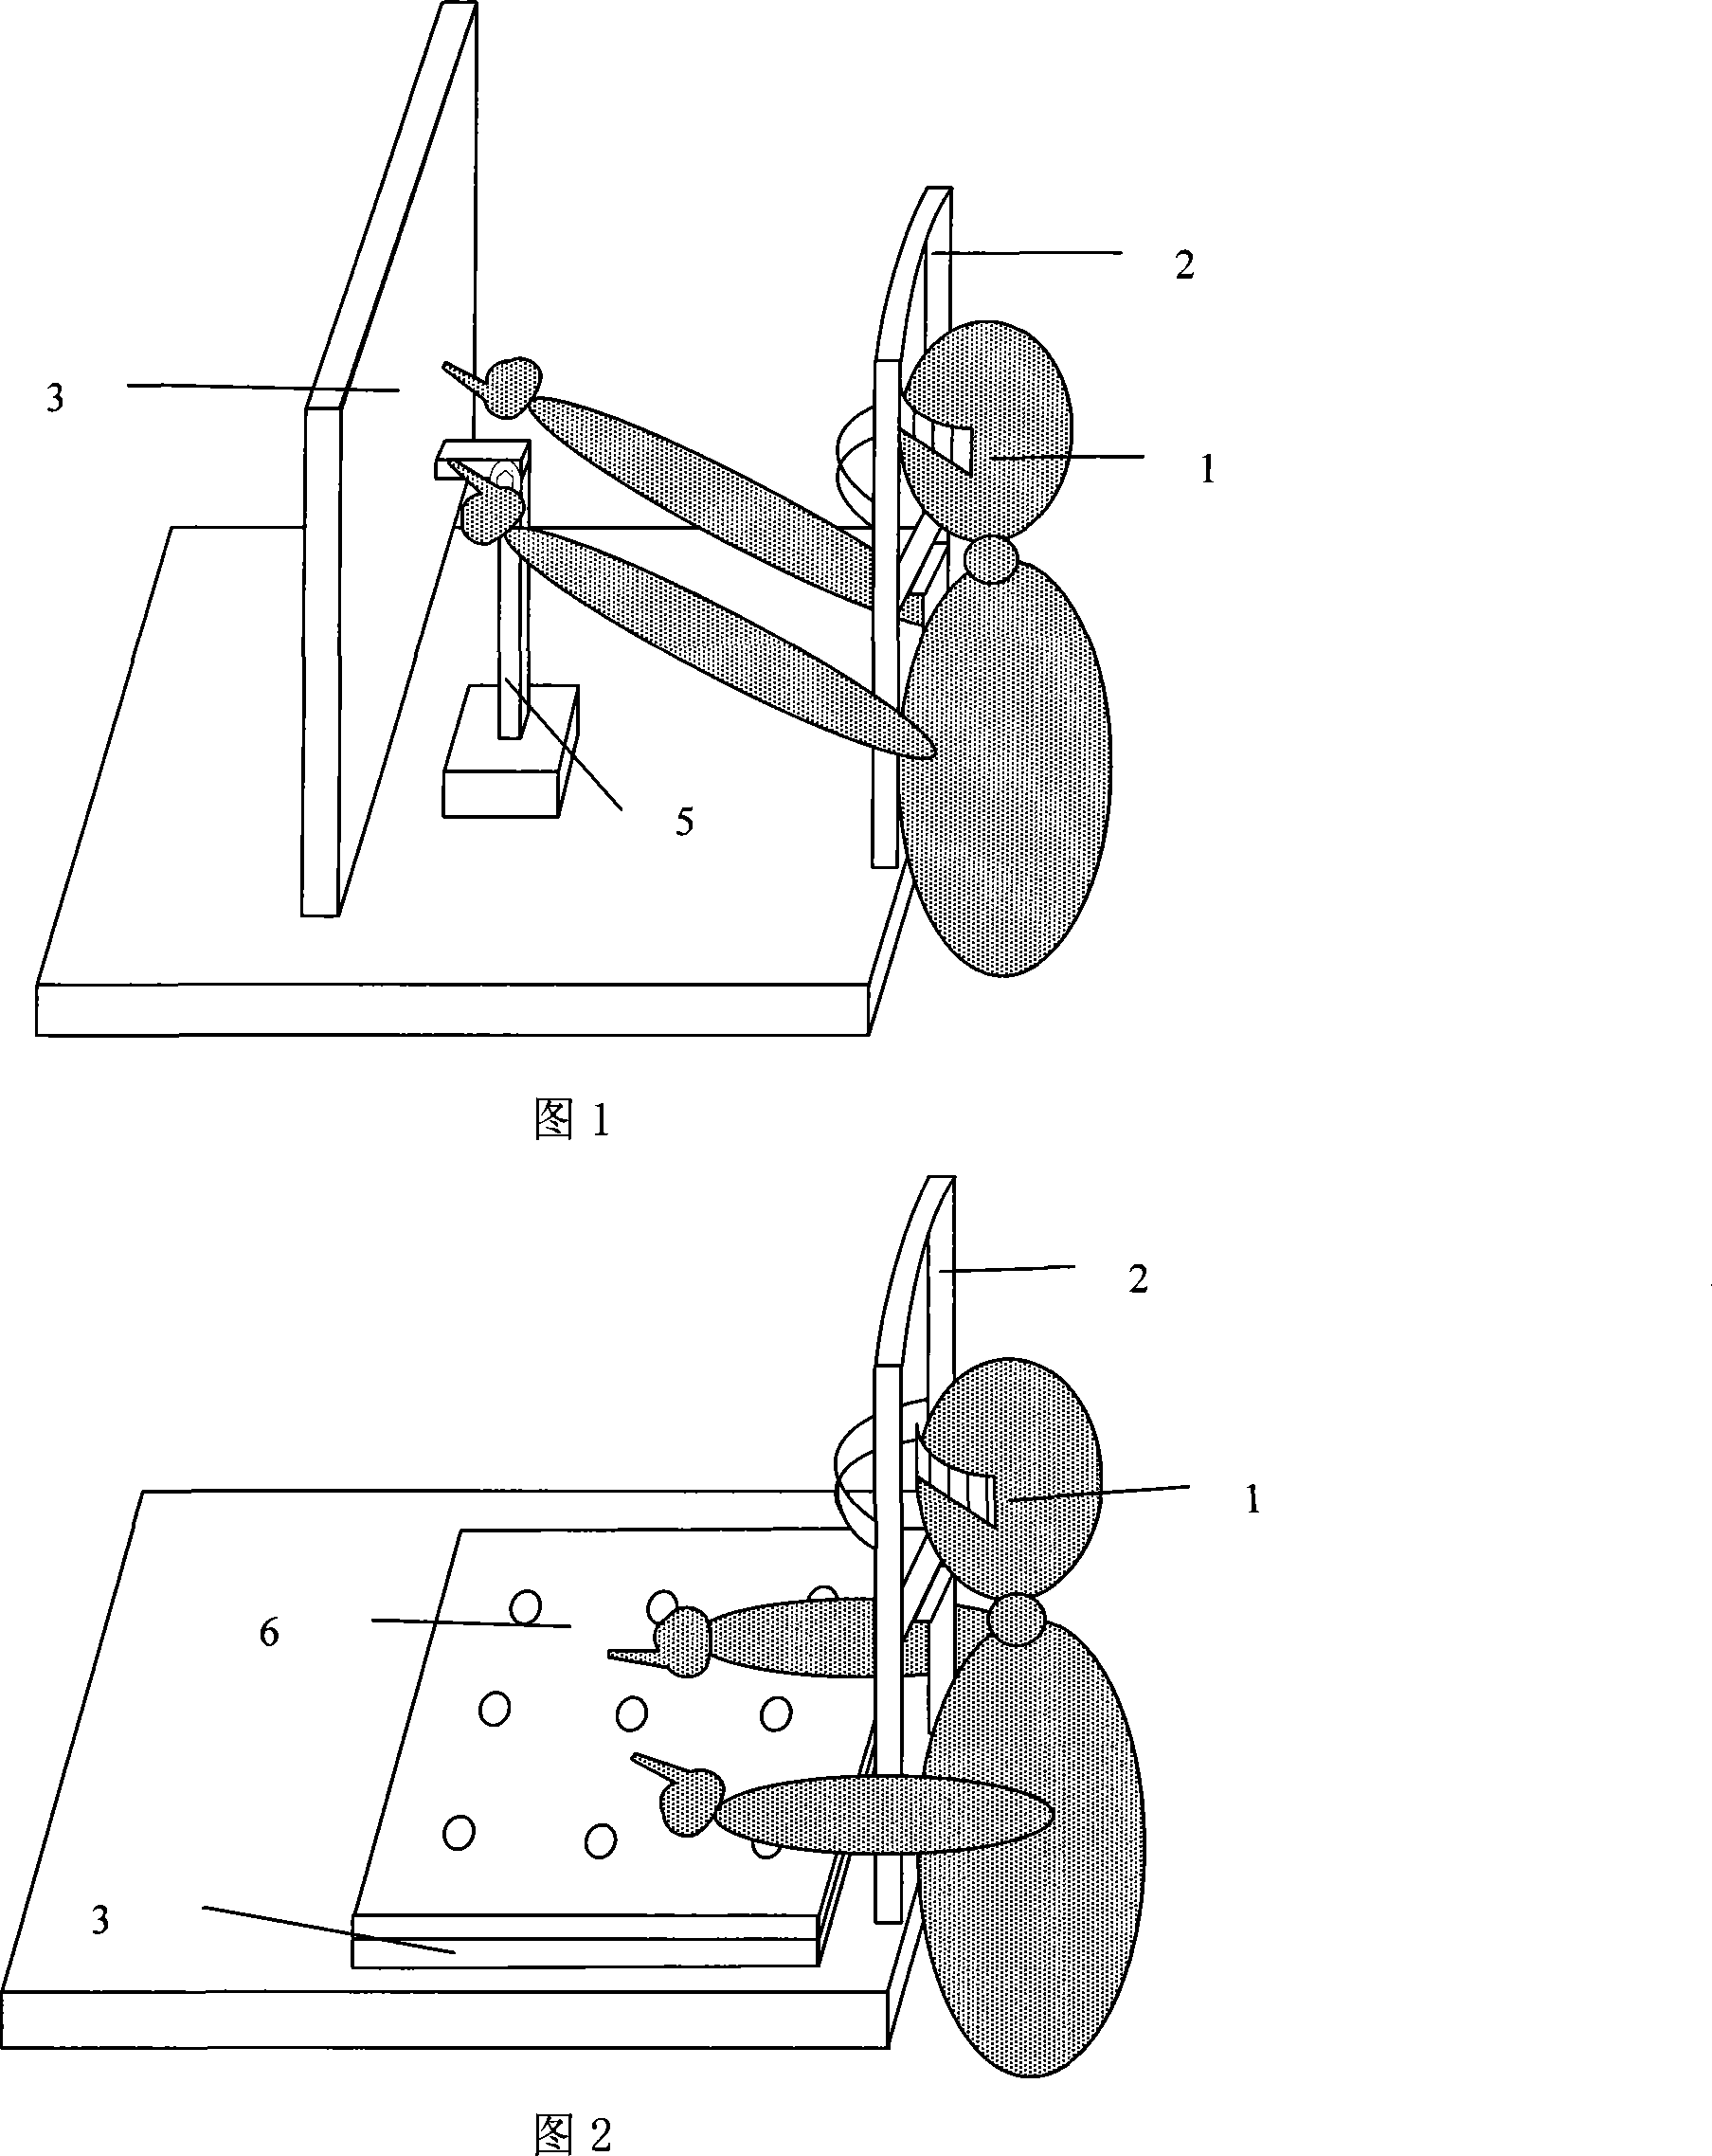 Visual hallucination emulation positioning system based on touch